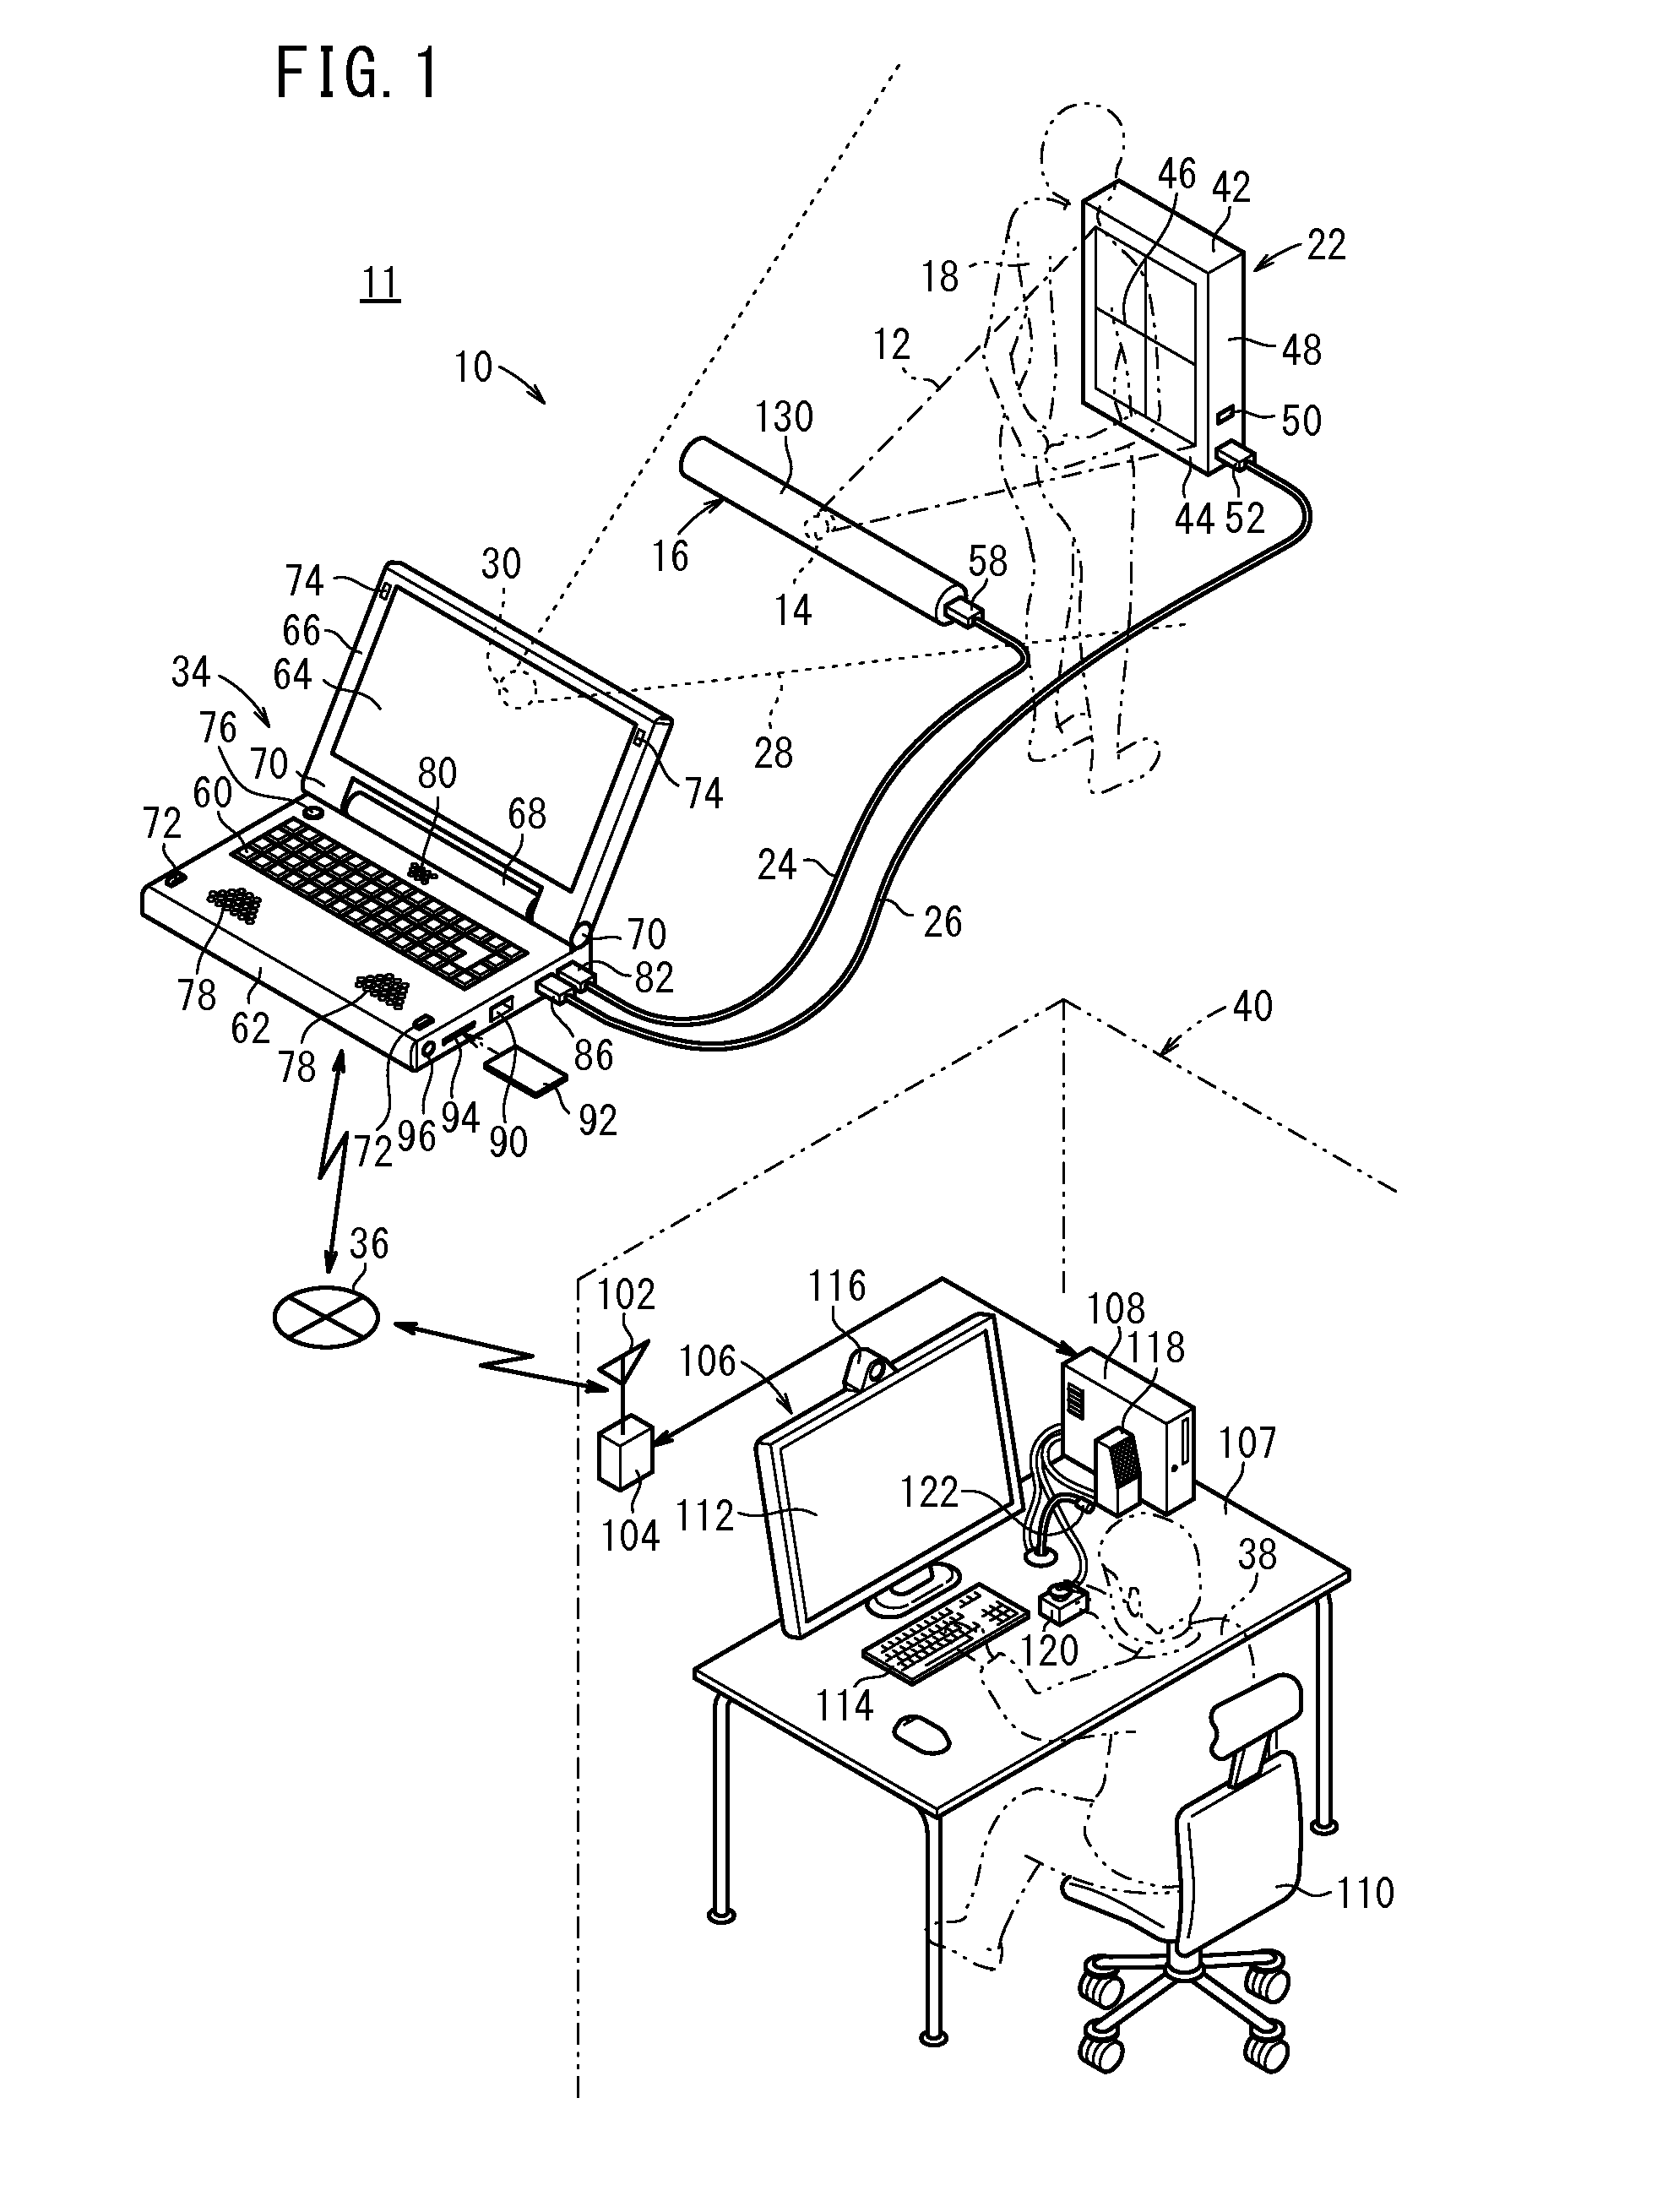 Radiographic imaging device, radiographic imaging system, and radiographic imaging method